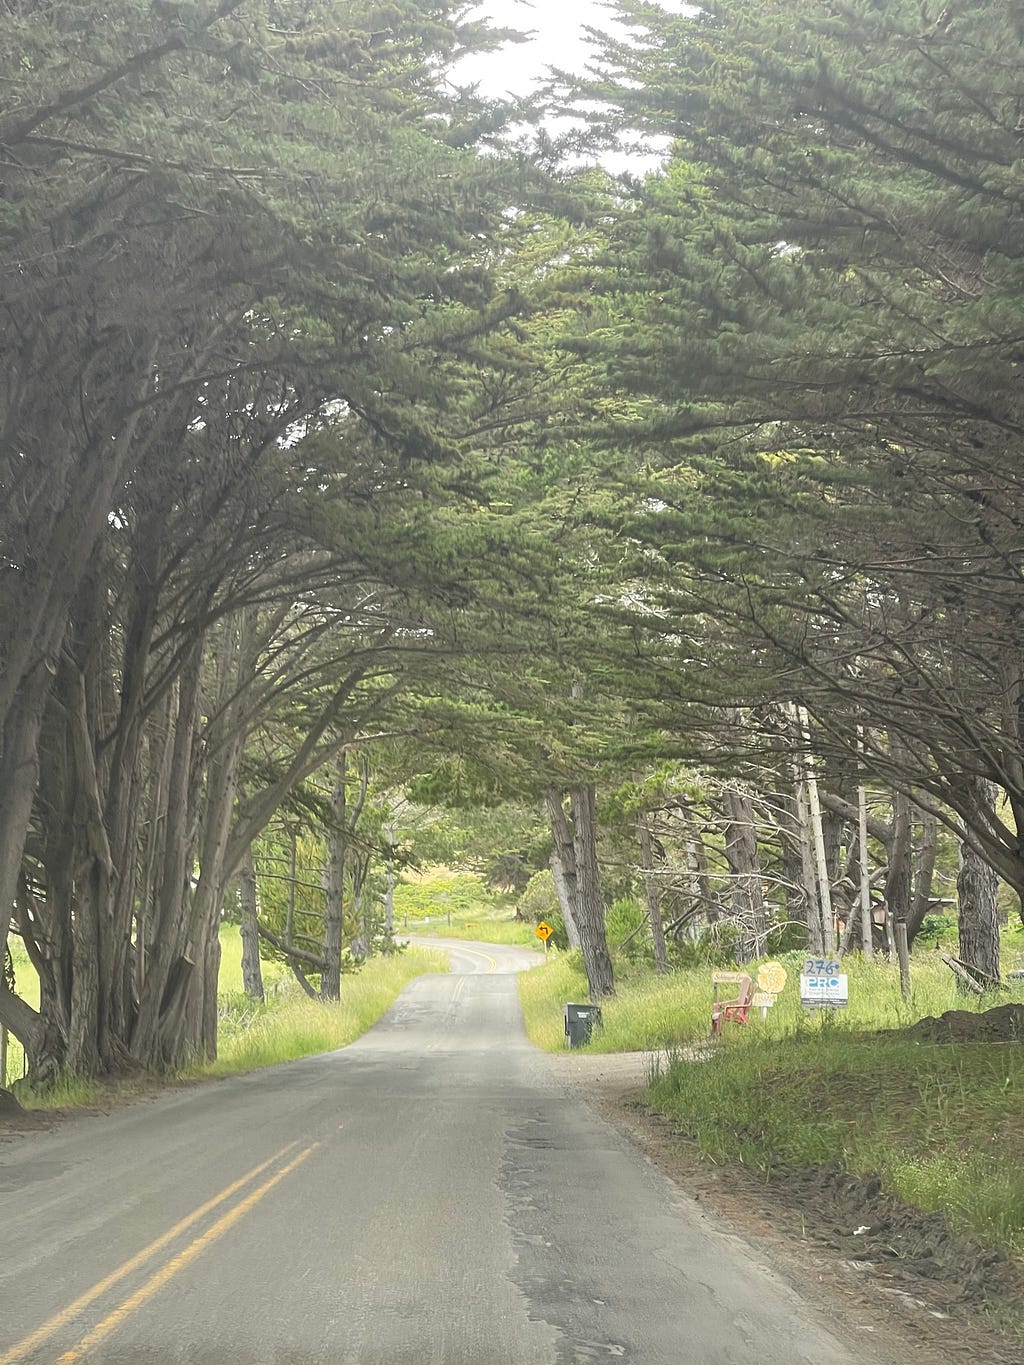 Entrance to Point Reyes